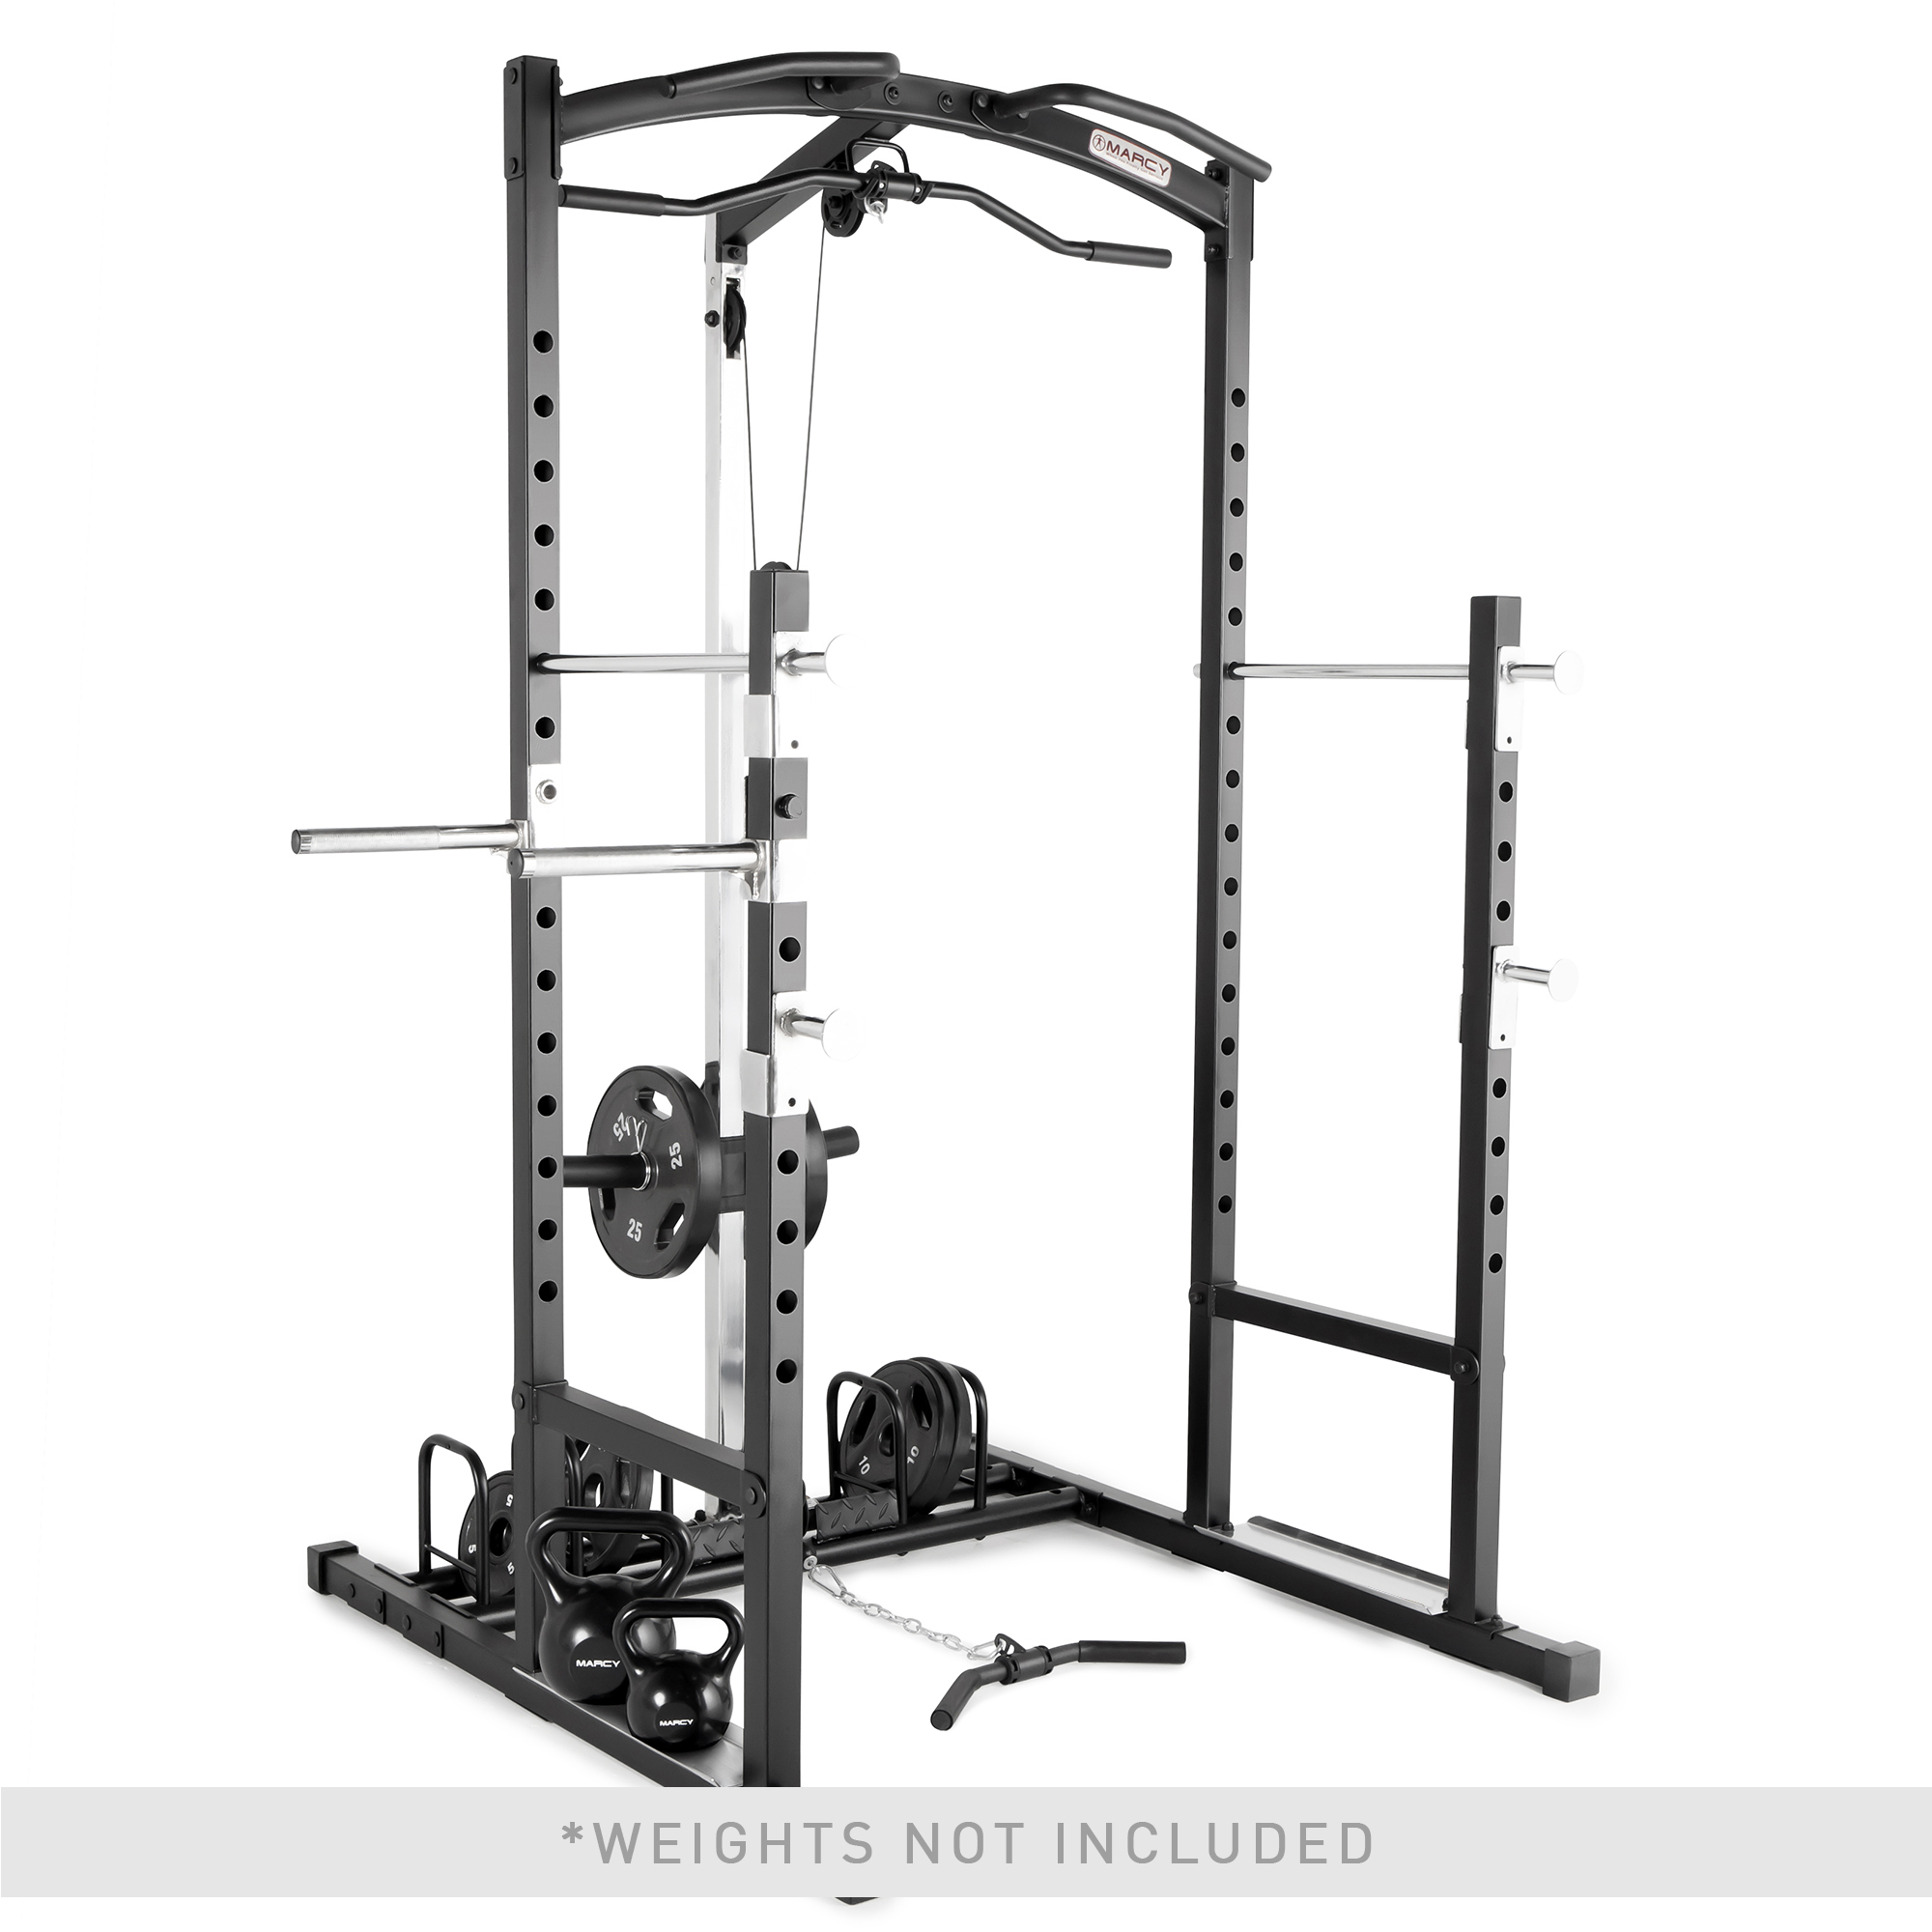 Marcy Home Gym Cage System MWM-7041 - image 3 of 12